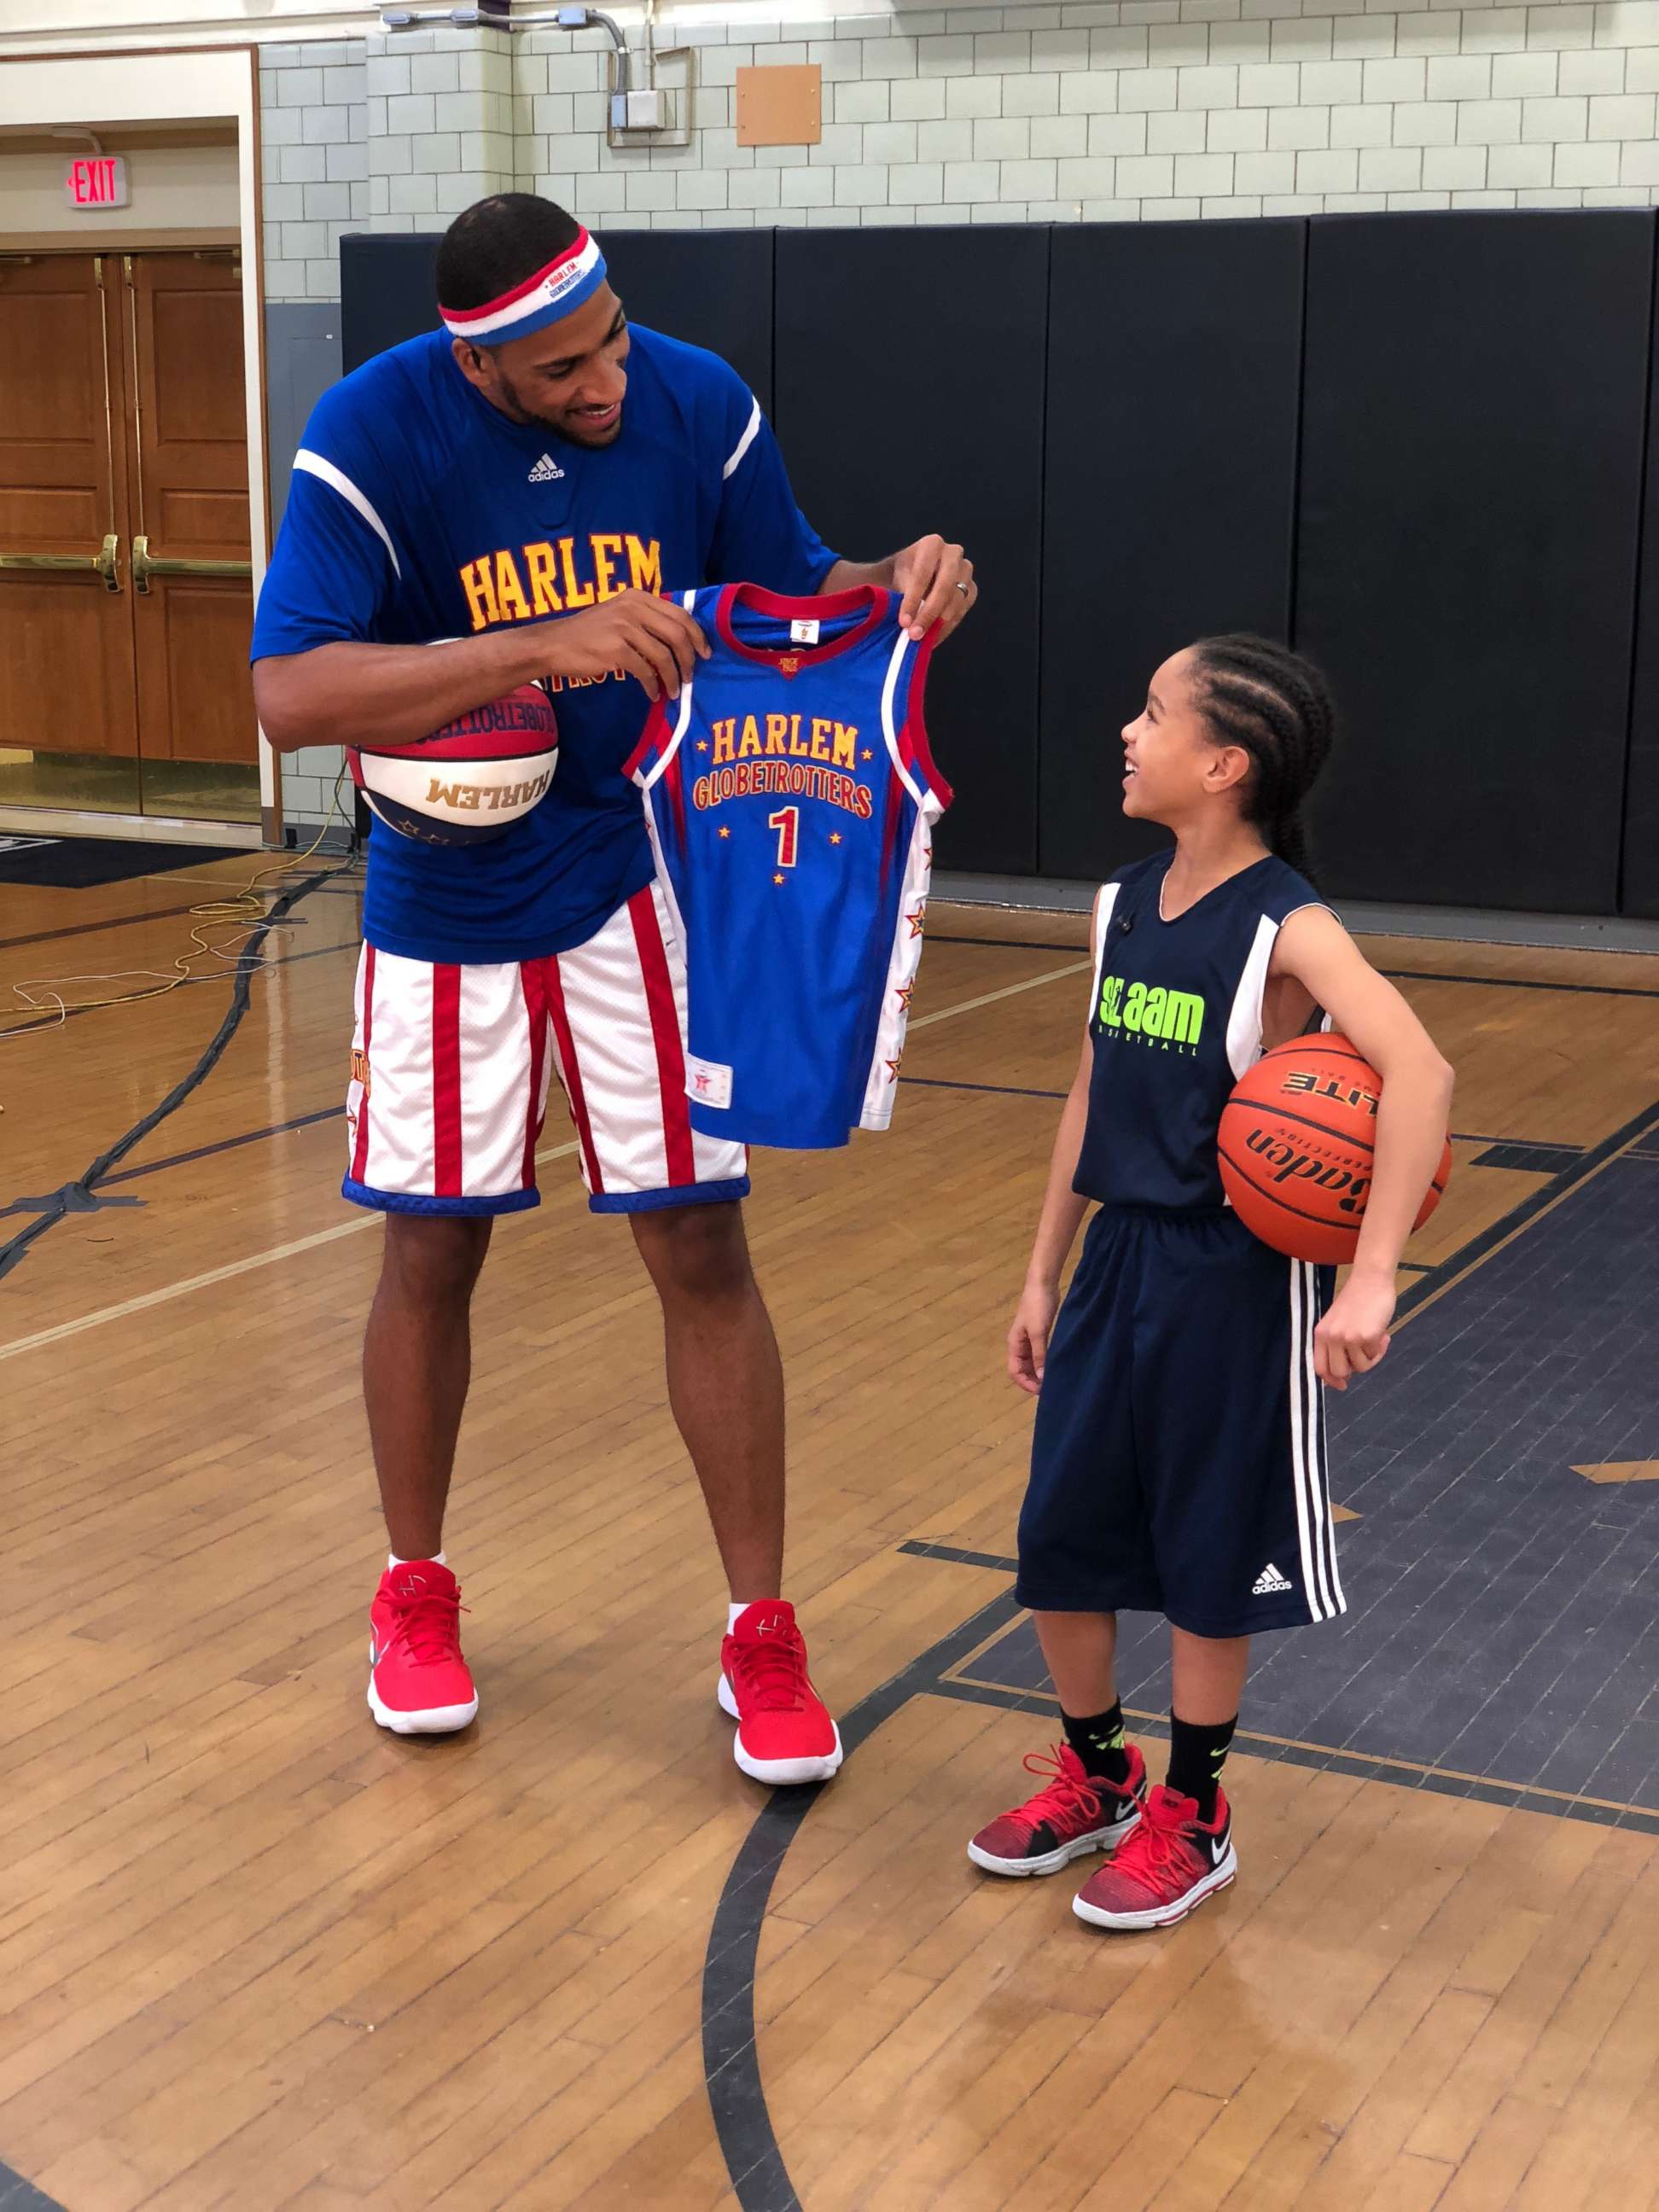 PHOTO: Karis also gained the attention of the Harlem Globetrotters, one of whom surprised her on the court today with her own personal jersey. 